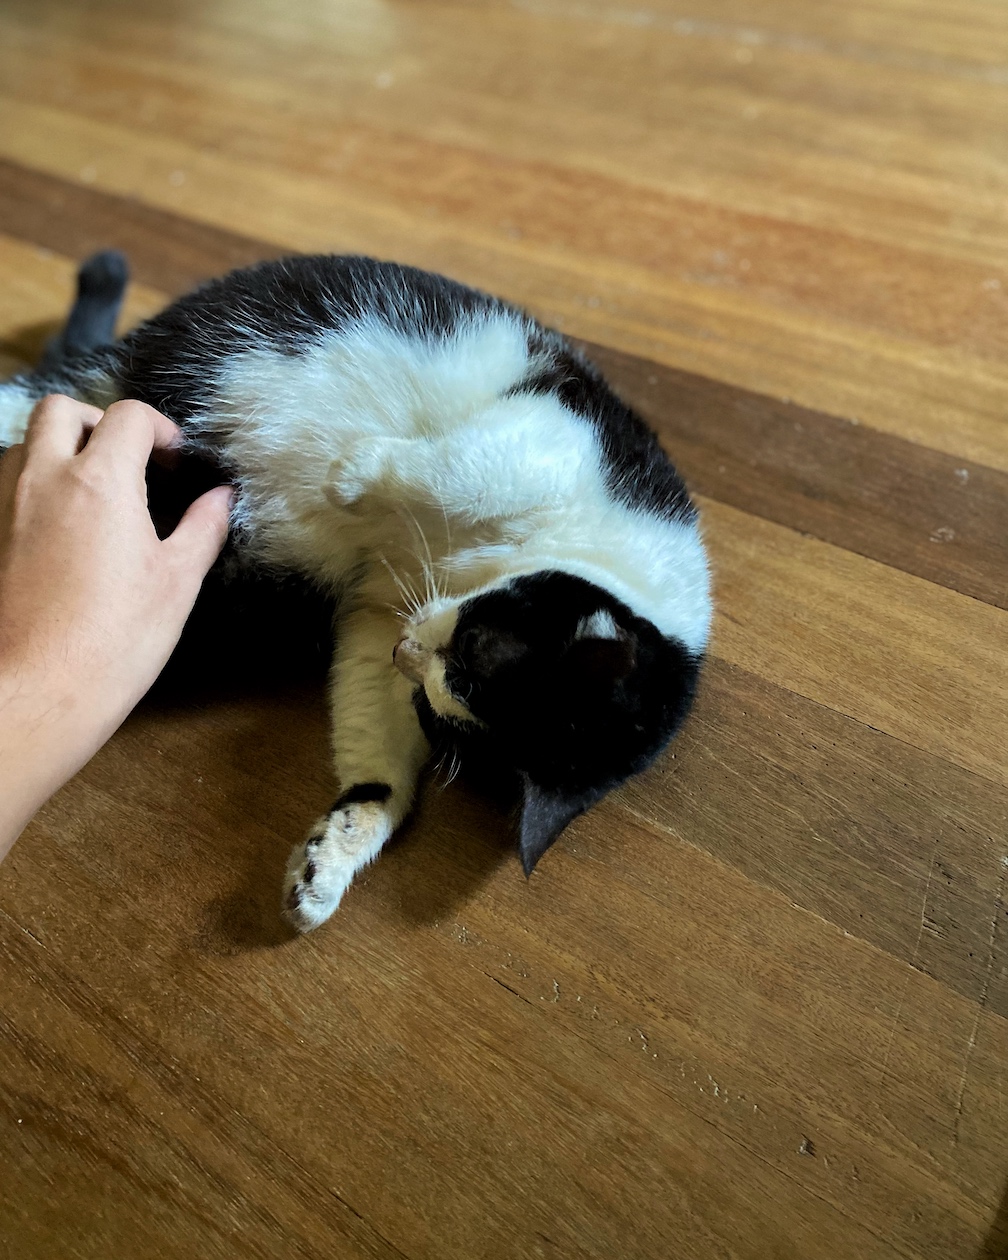 Stroking Champy the cat's belly